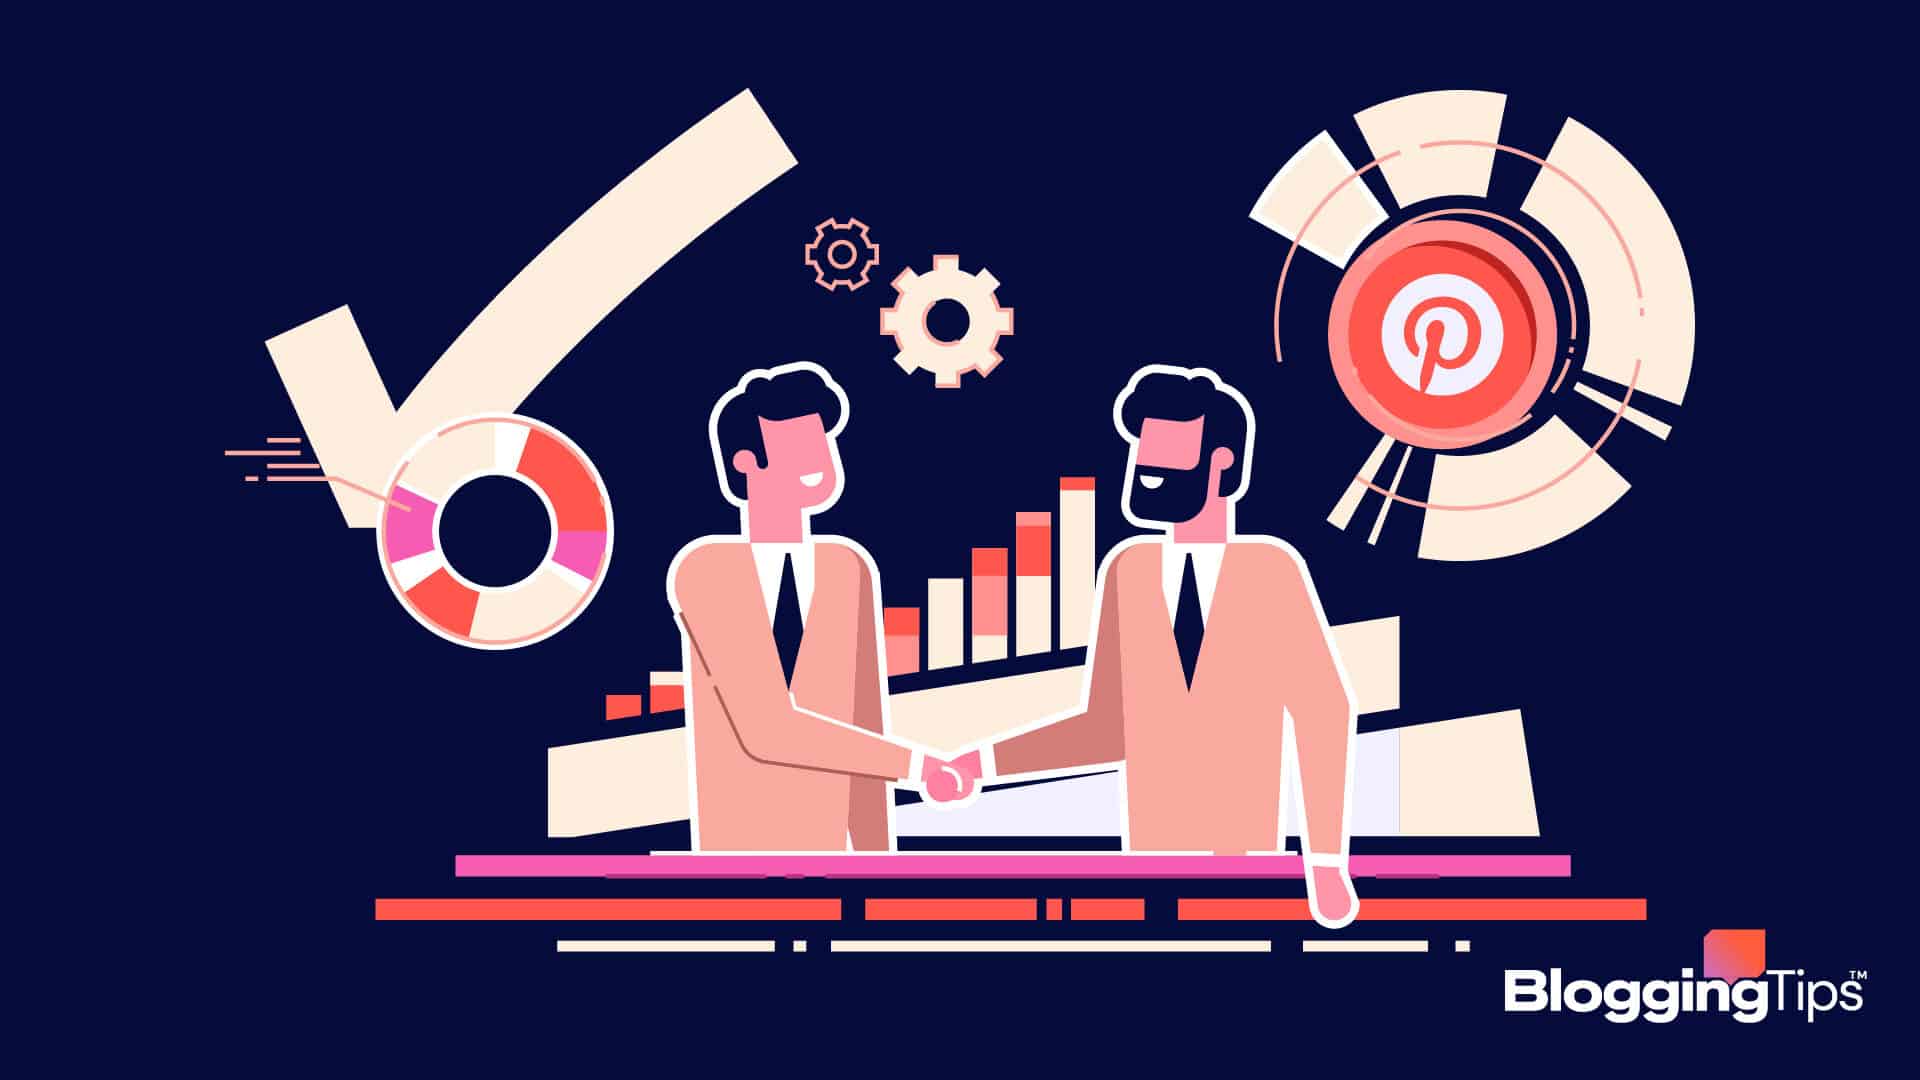 vector graphic showing an illustration of people making money using Pinterest affiliate marketing